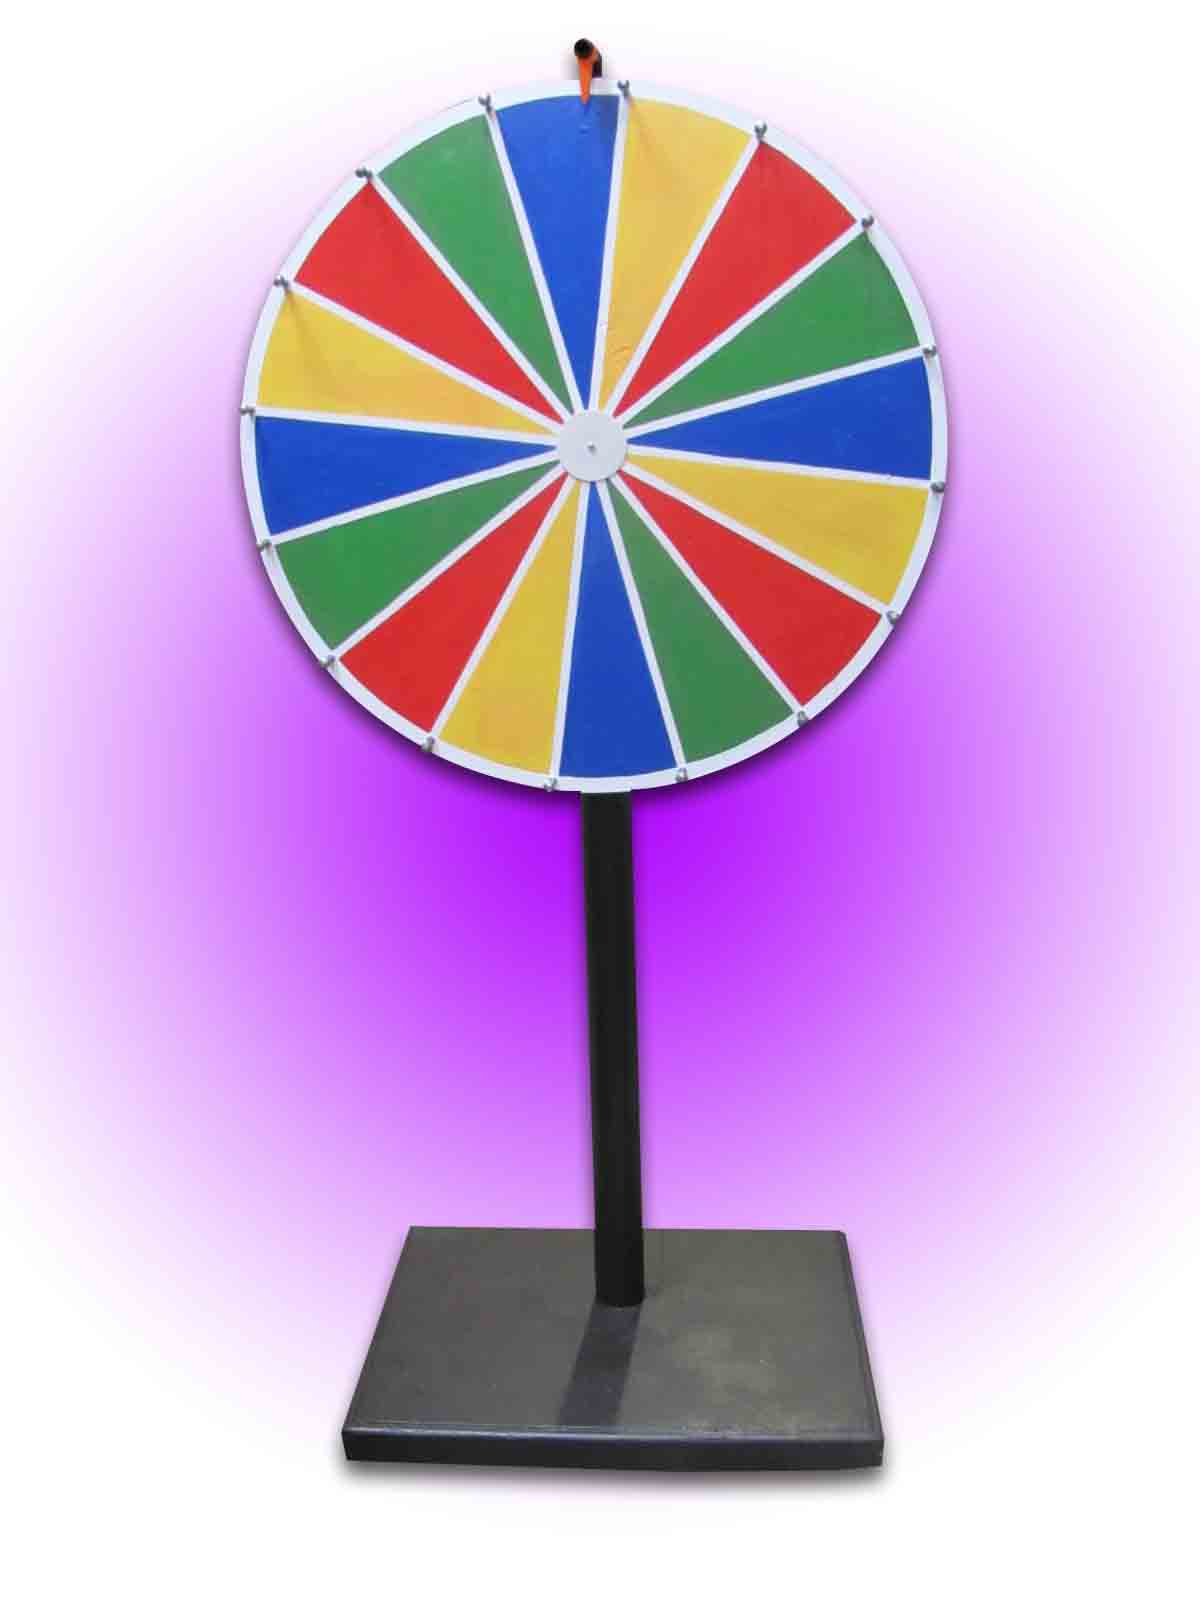 Wheel of Fortune Large (H: 2.04m x W: 1.21m x D: 0.61m) 